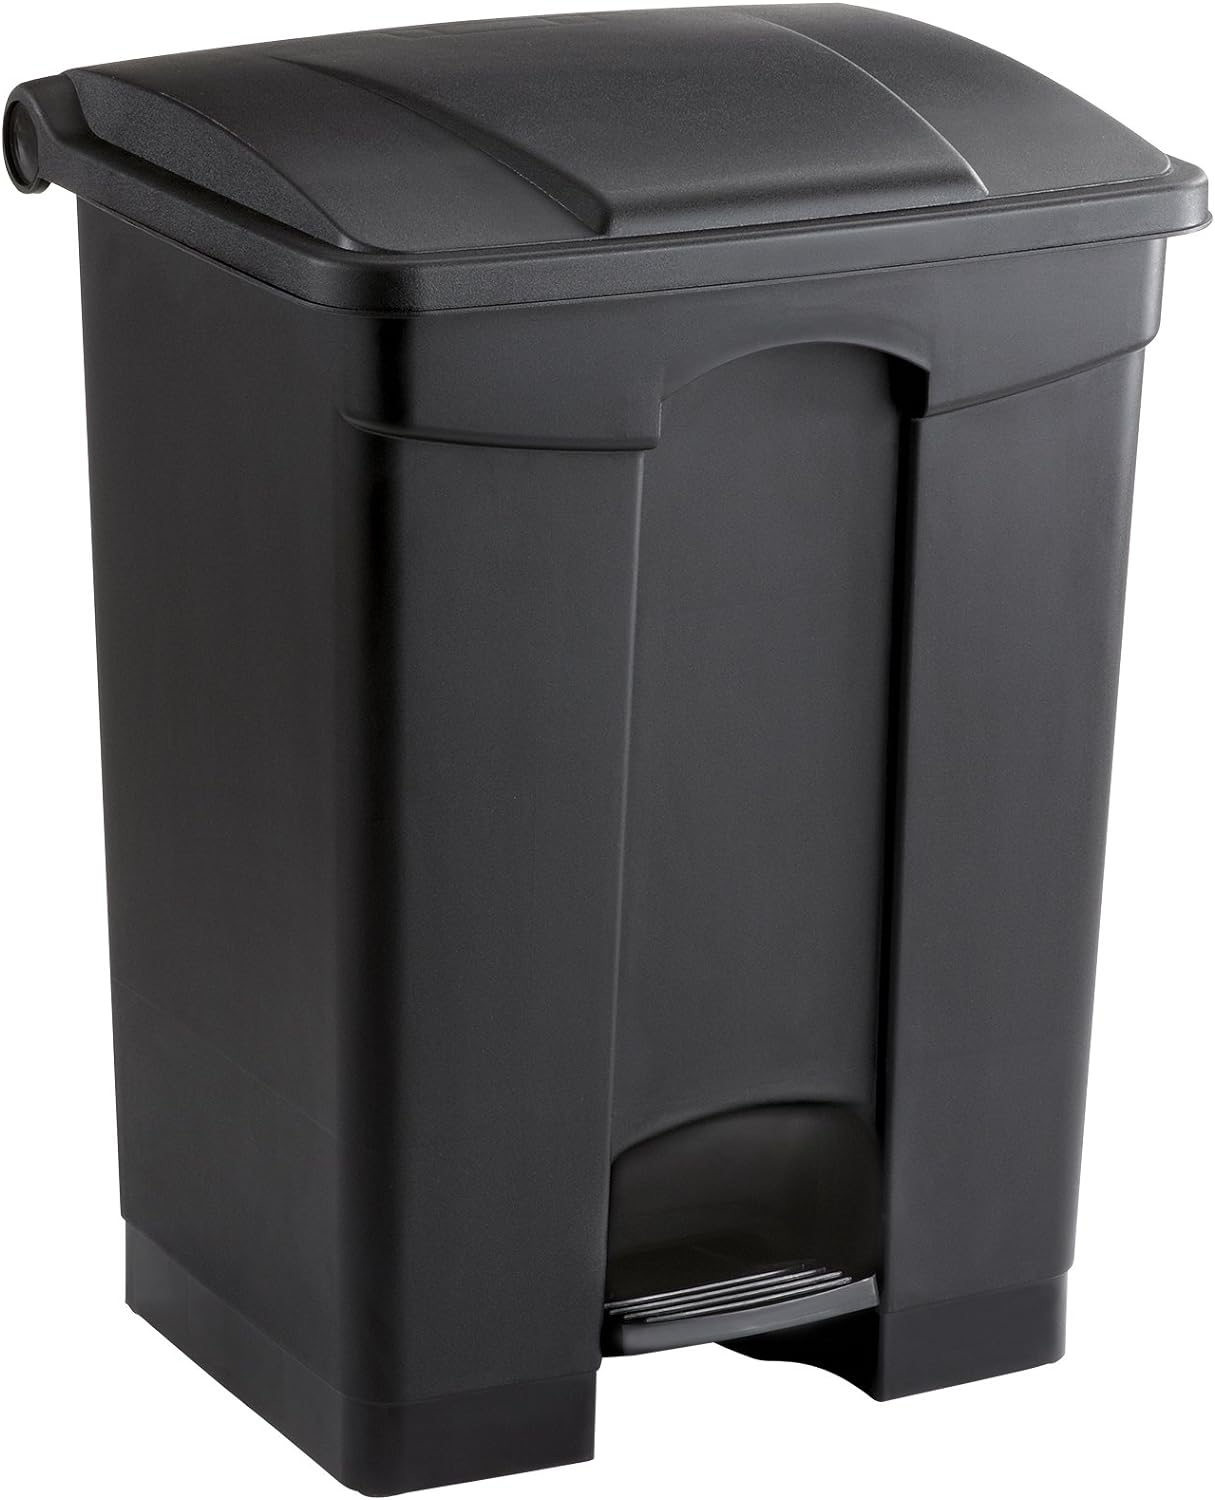 Safco Products Plastic Step-On Trash Can 9922BL, Black, Hands-Free